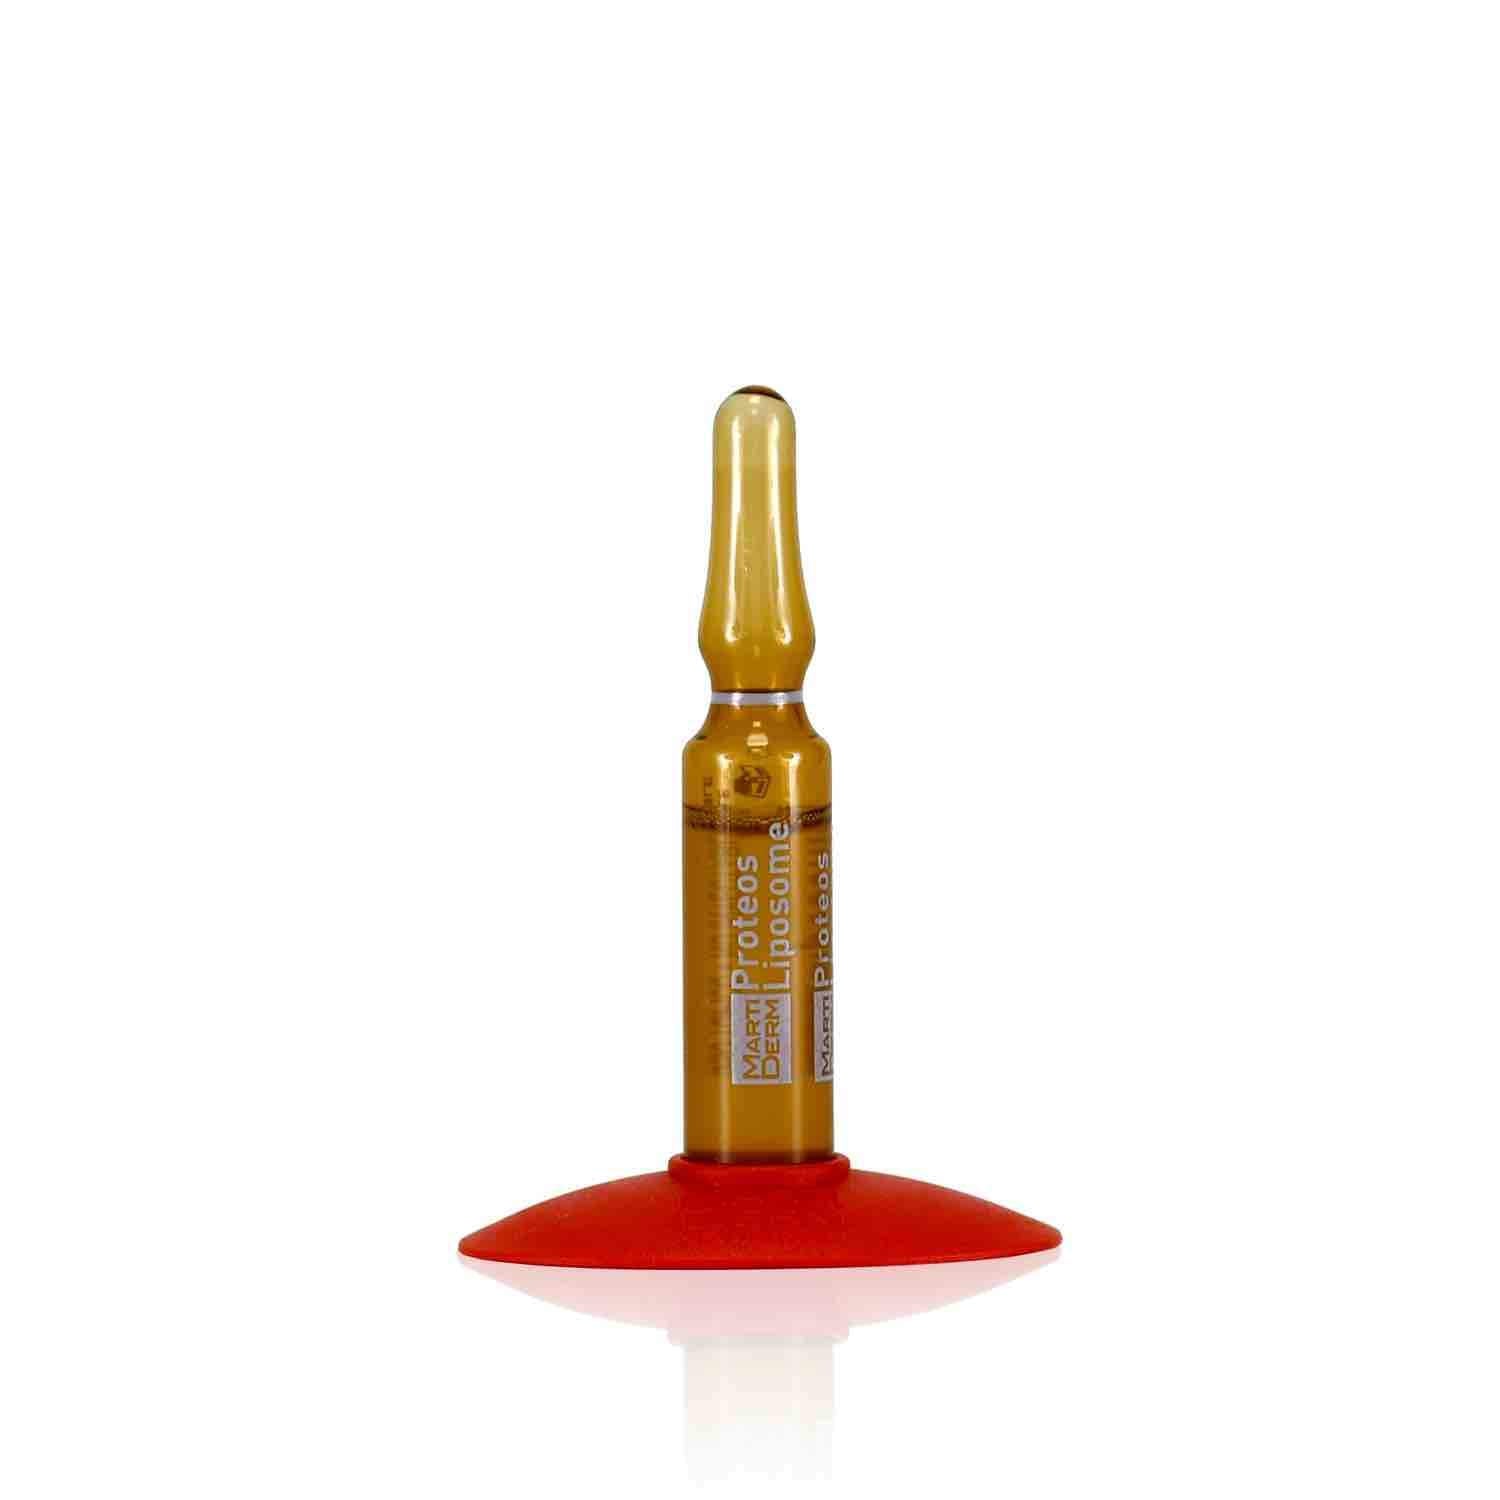 Shop Proteos Liposome 30 Ampoules from Martiderm on SublimeLife.in. Best for closing pores and toning skin.